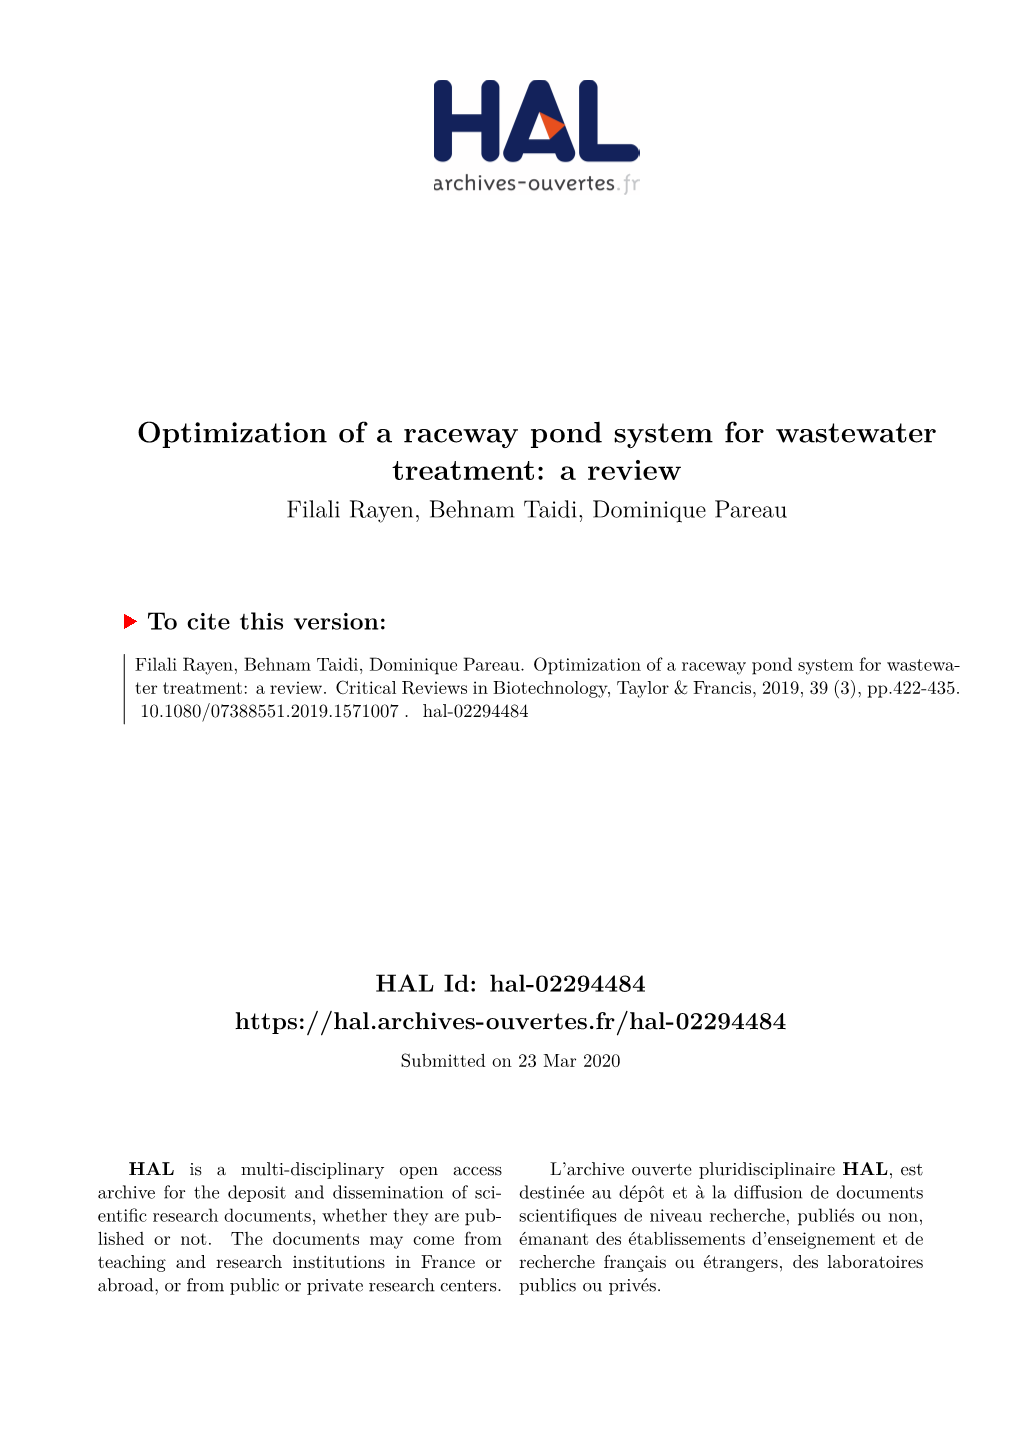 Optimization of a Raceway Pond System for Wastewater Treatment: a Review Filali Rayen, Behnam Taidi, Dominique Pareau